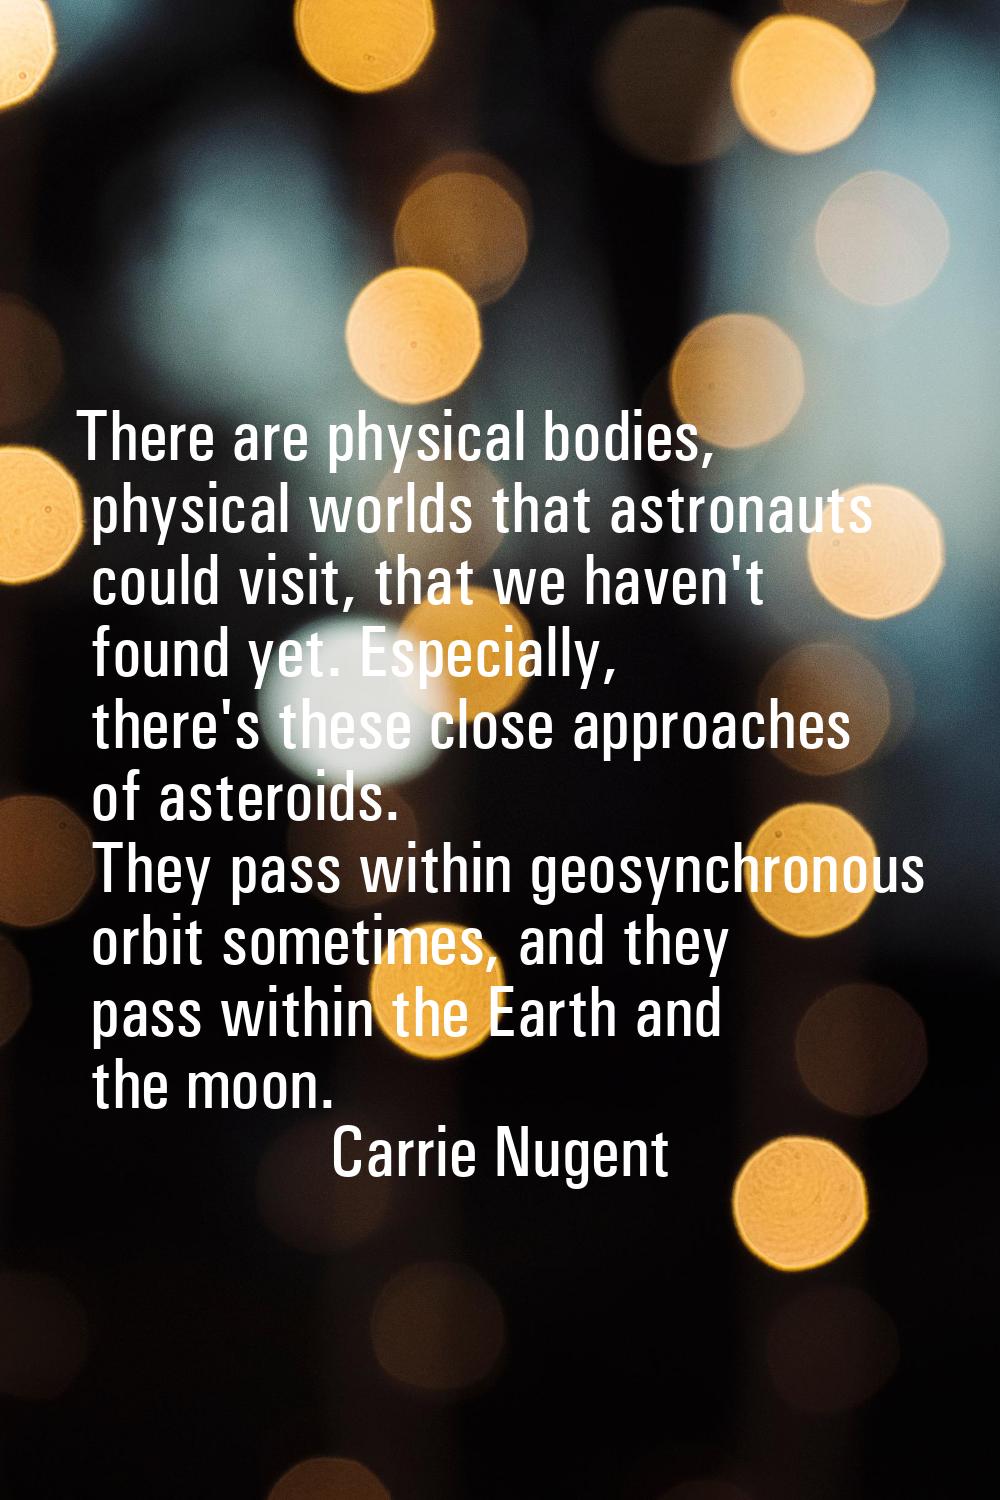 There are physical bodies, physical worlds that astronauts could visit, that we haven't found yet. 